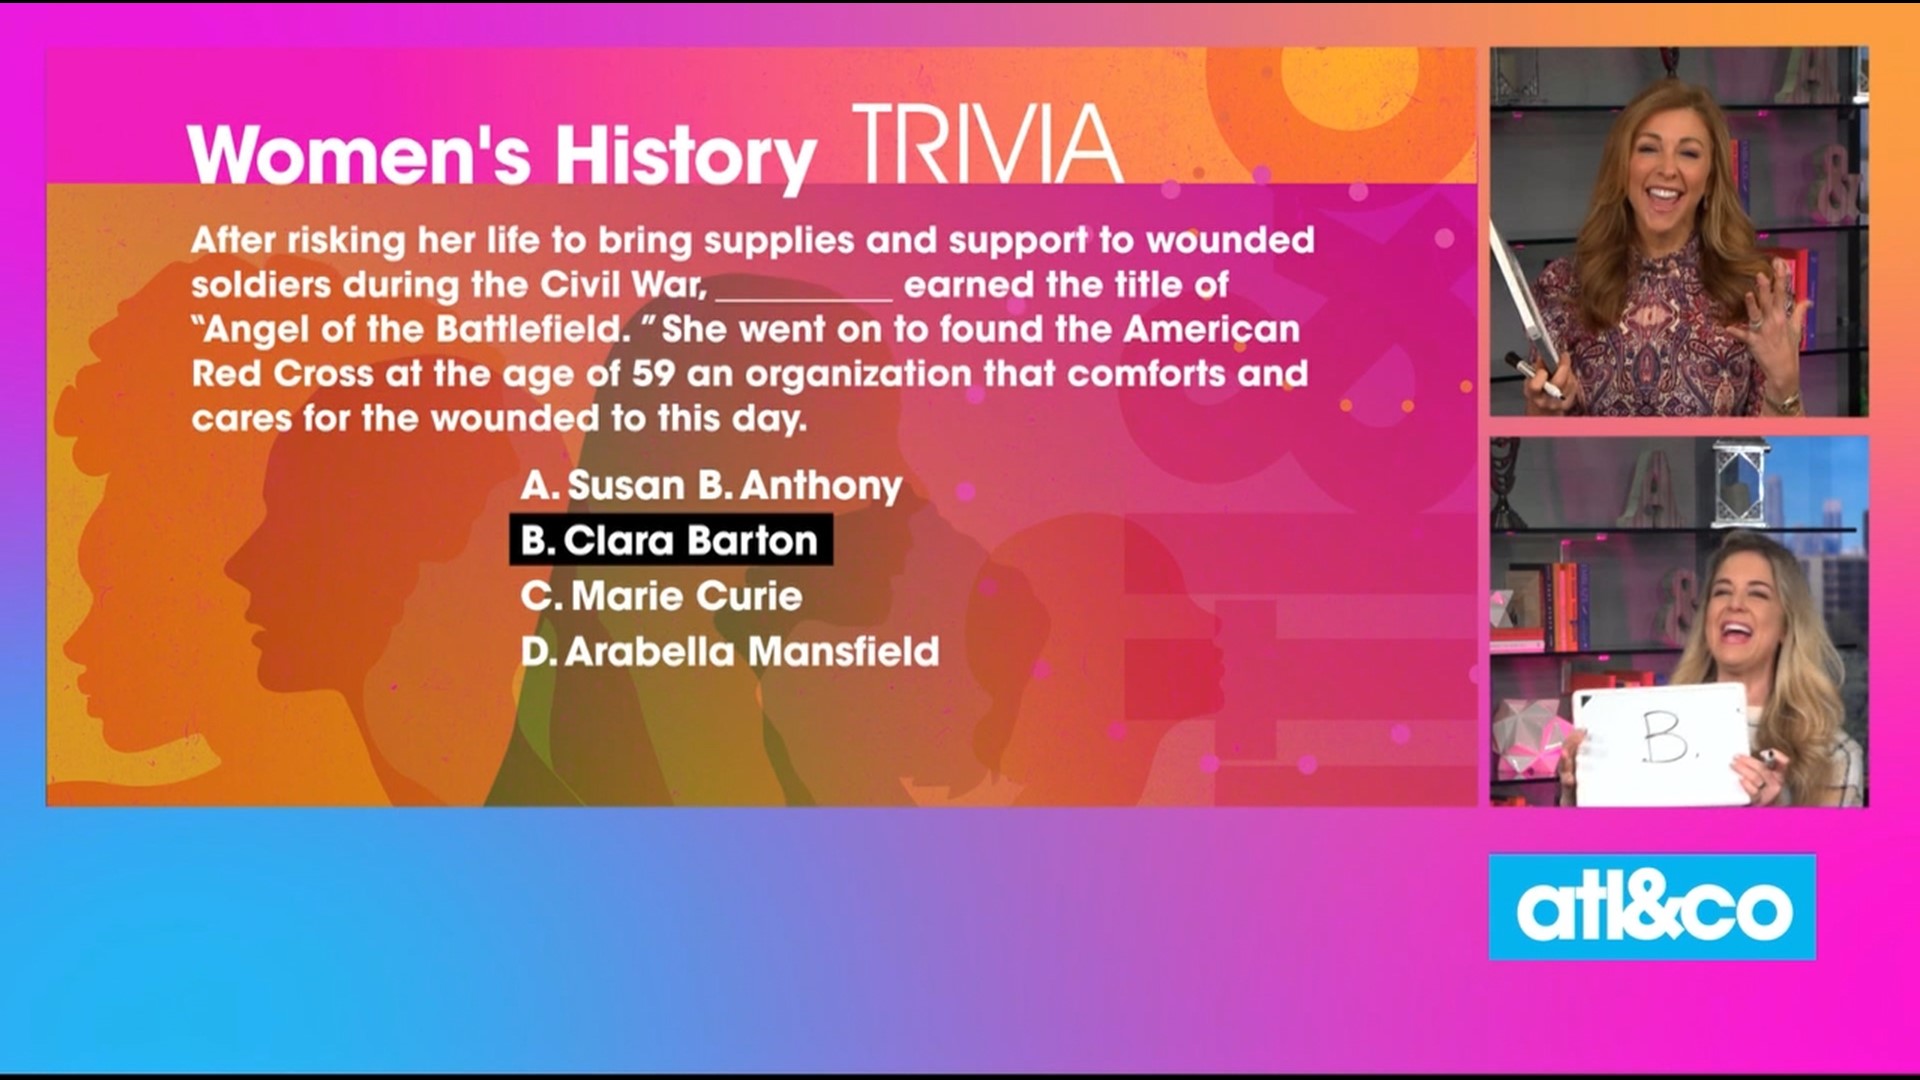 Play along in our fun fact-filled game of Women's History with fierce, trailblazing women from all eras.